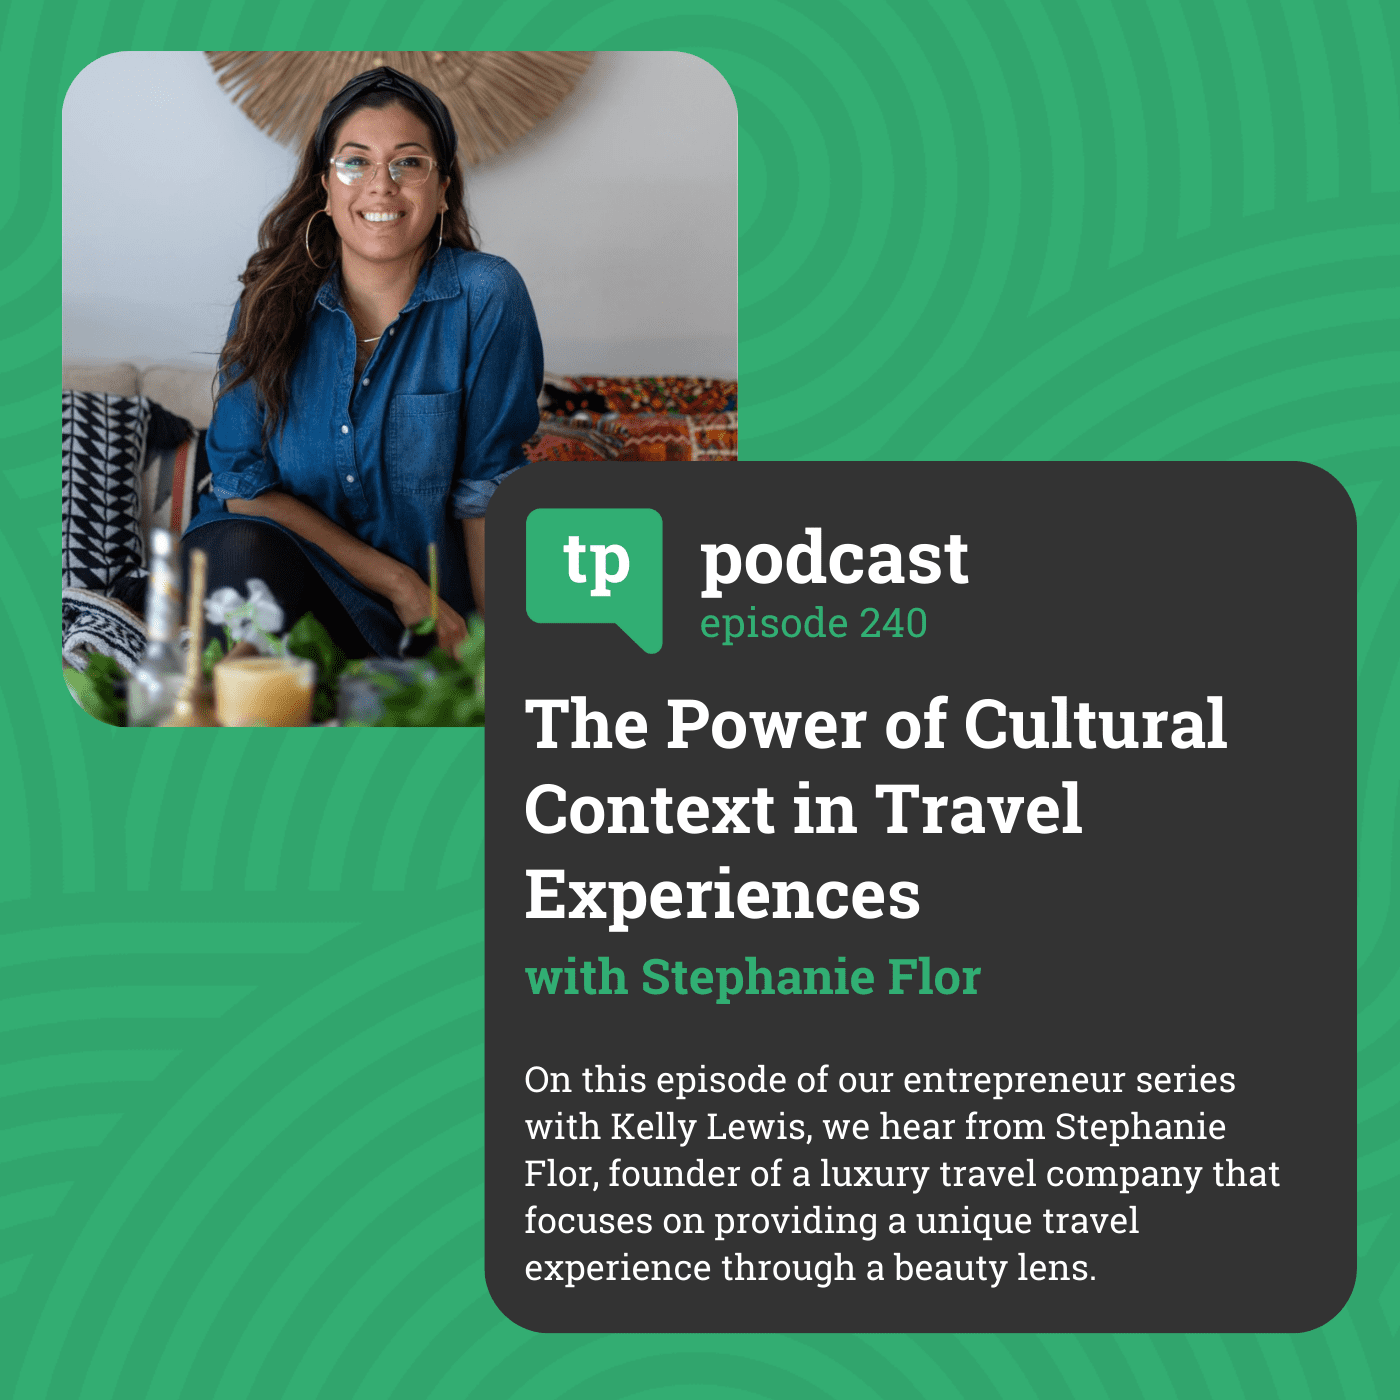 The Power of Cultural Context in Travel Experiences